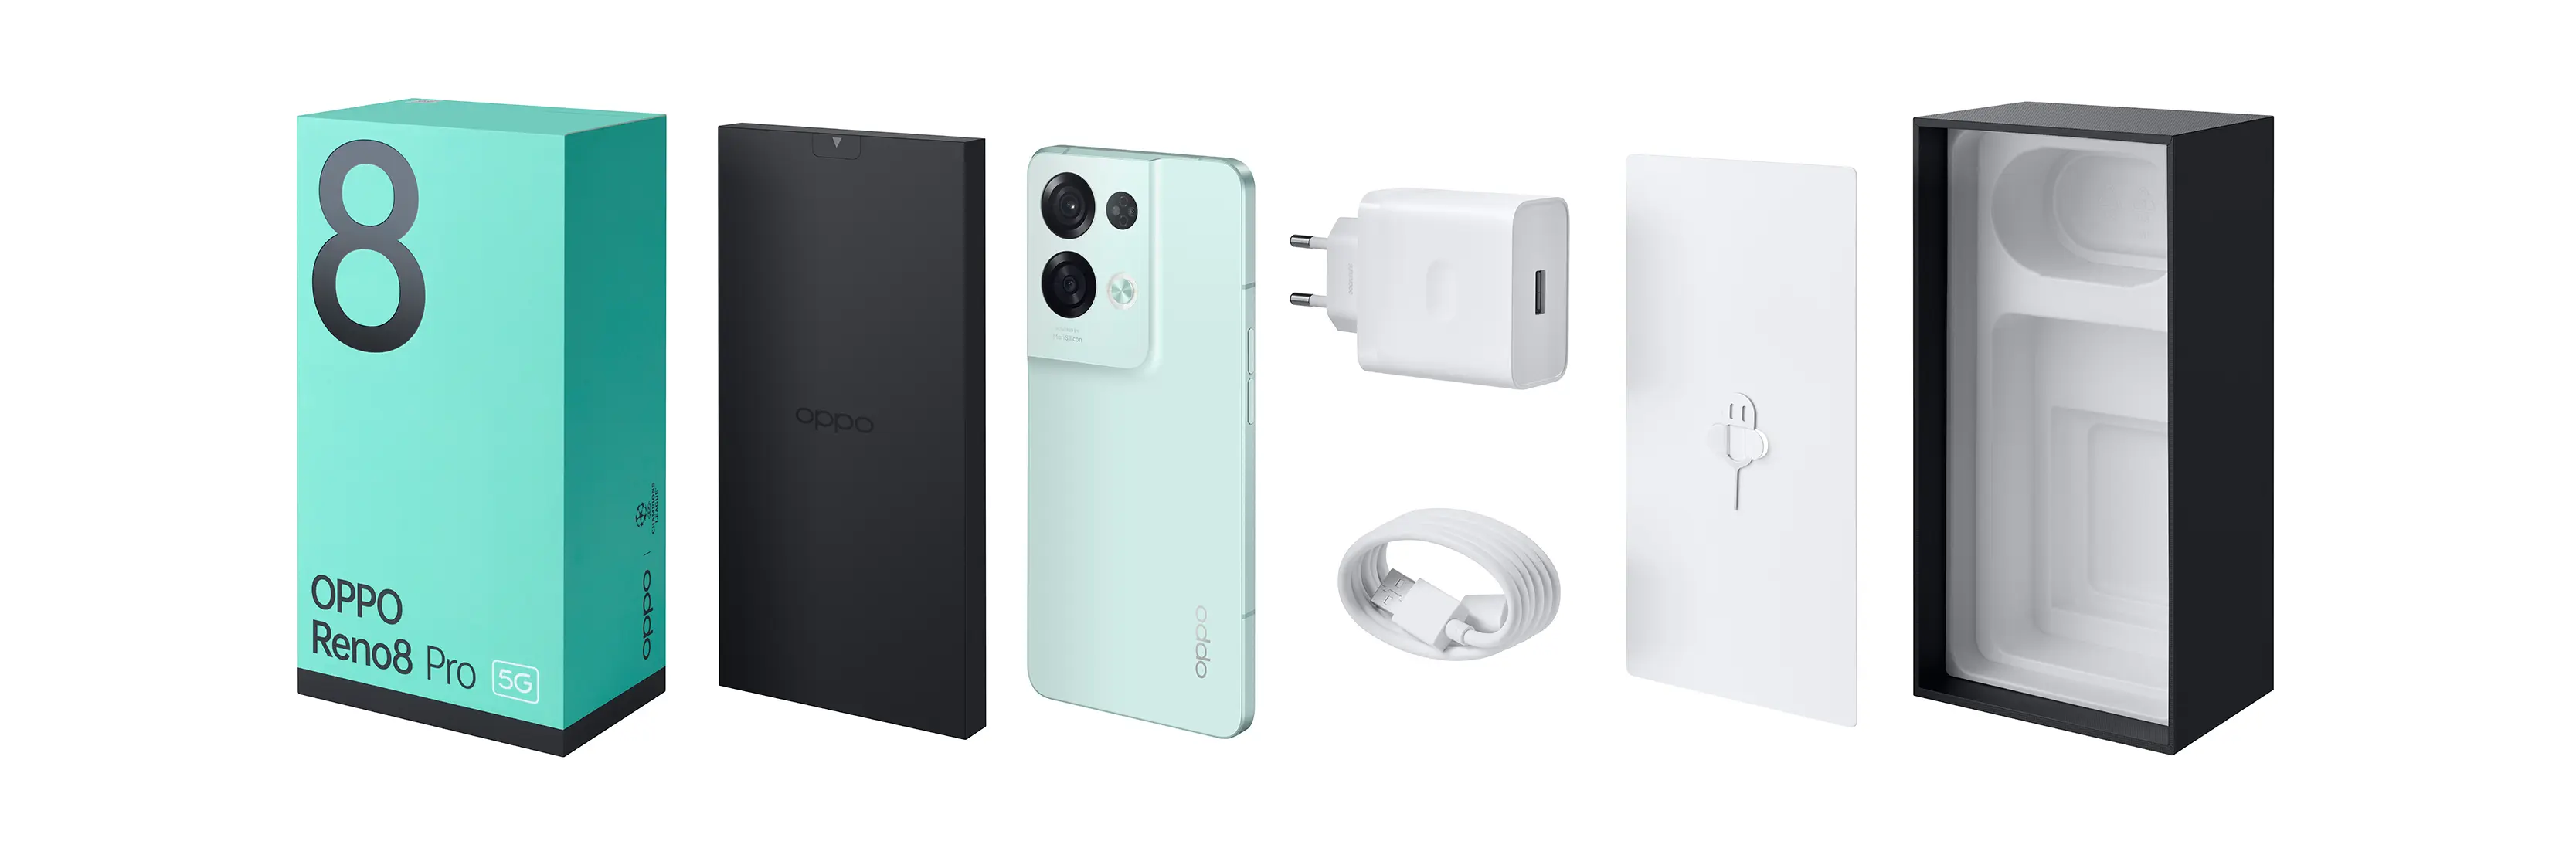 OPPO-Store-UnboxingReno8-Pro-Green.png